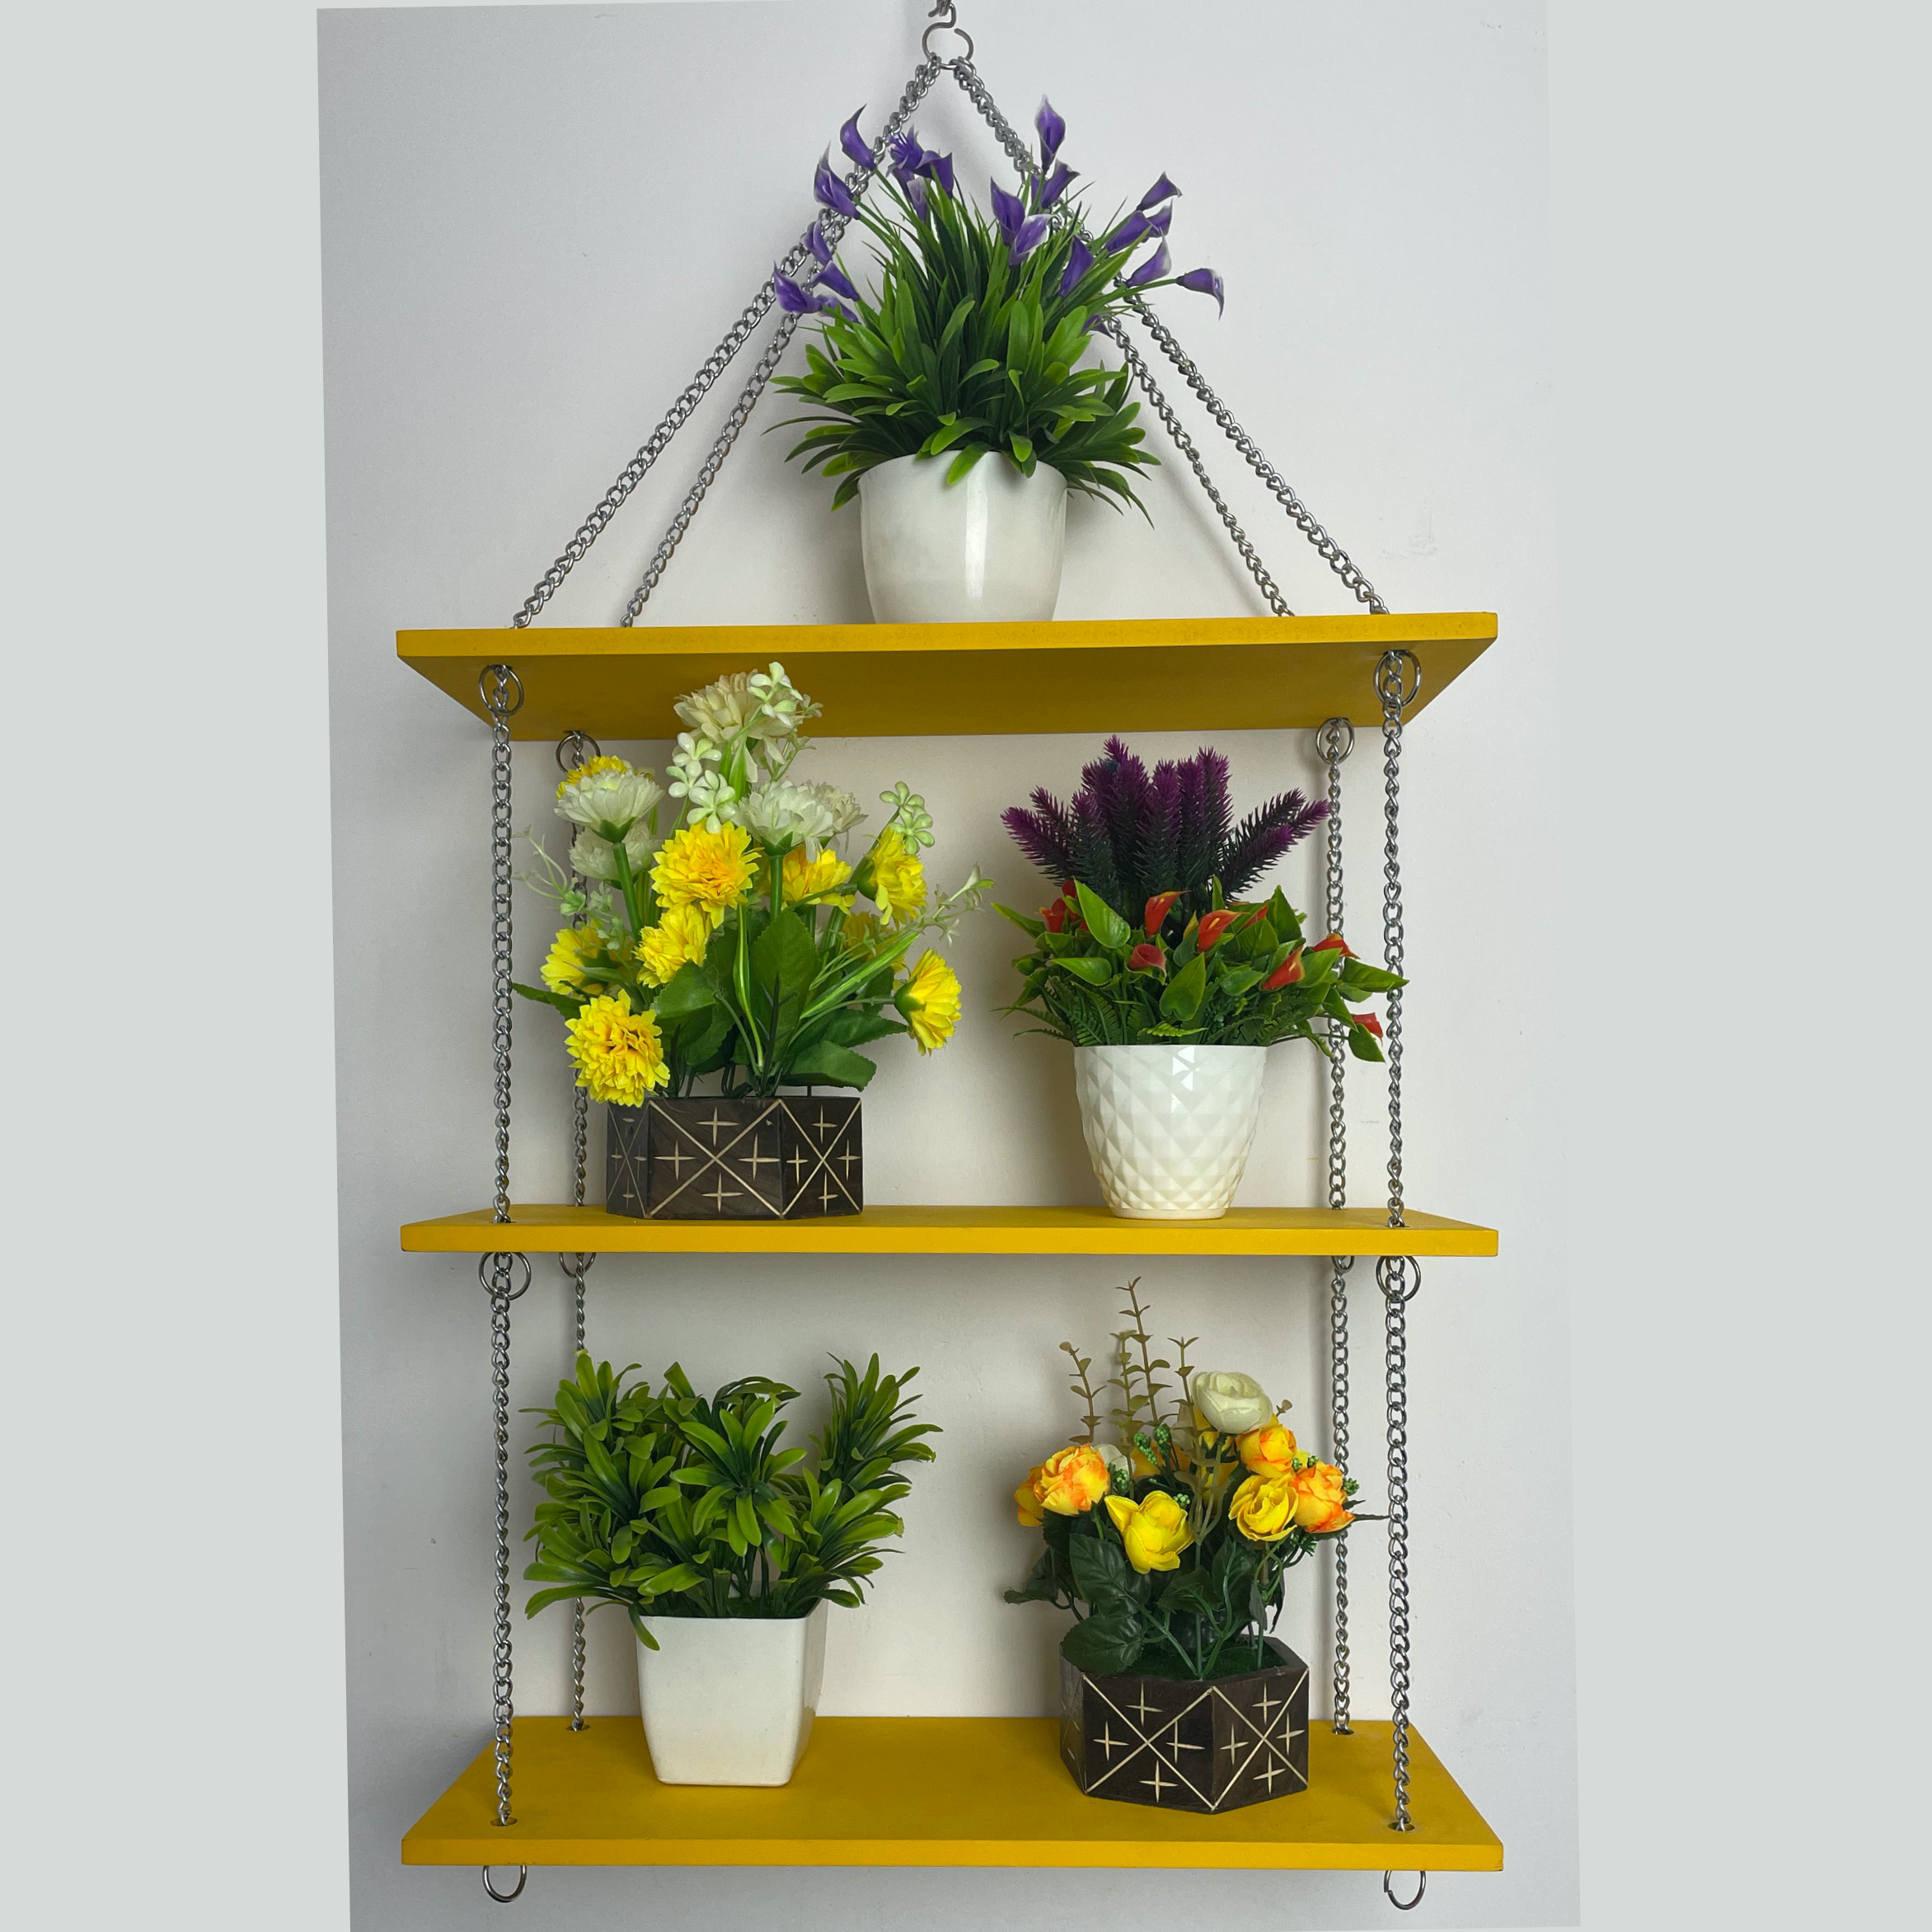 Wooden Rectangular Wall Hanging Planter Stand with Stainless Steel Chains - Yellow / Red